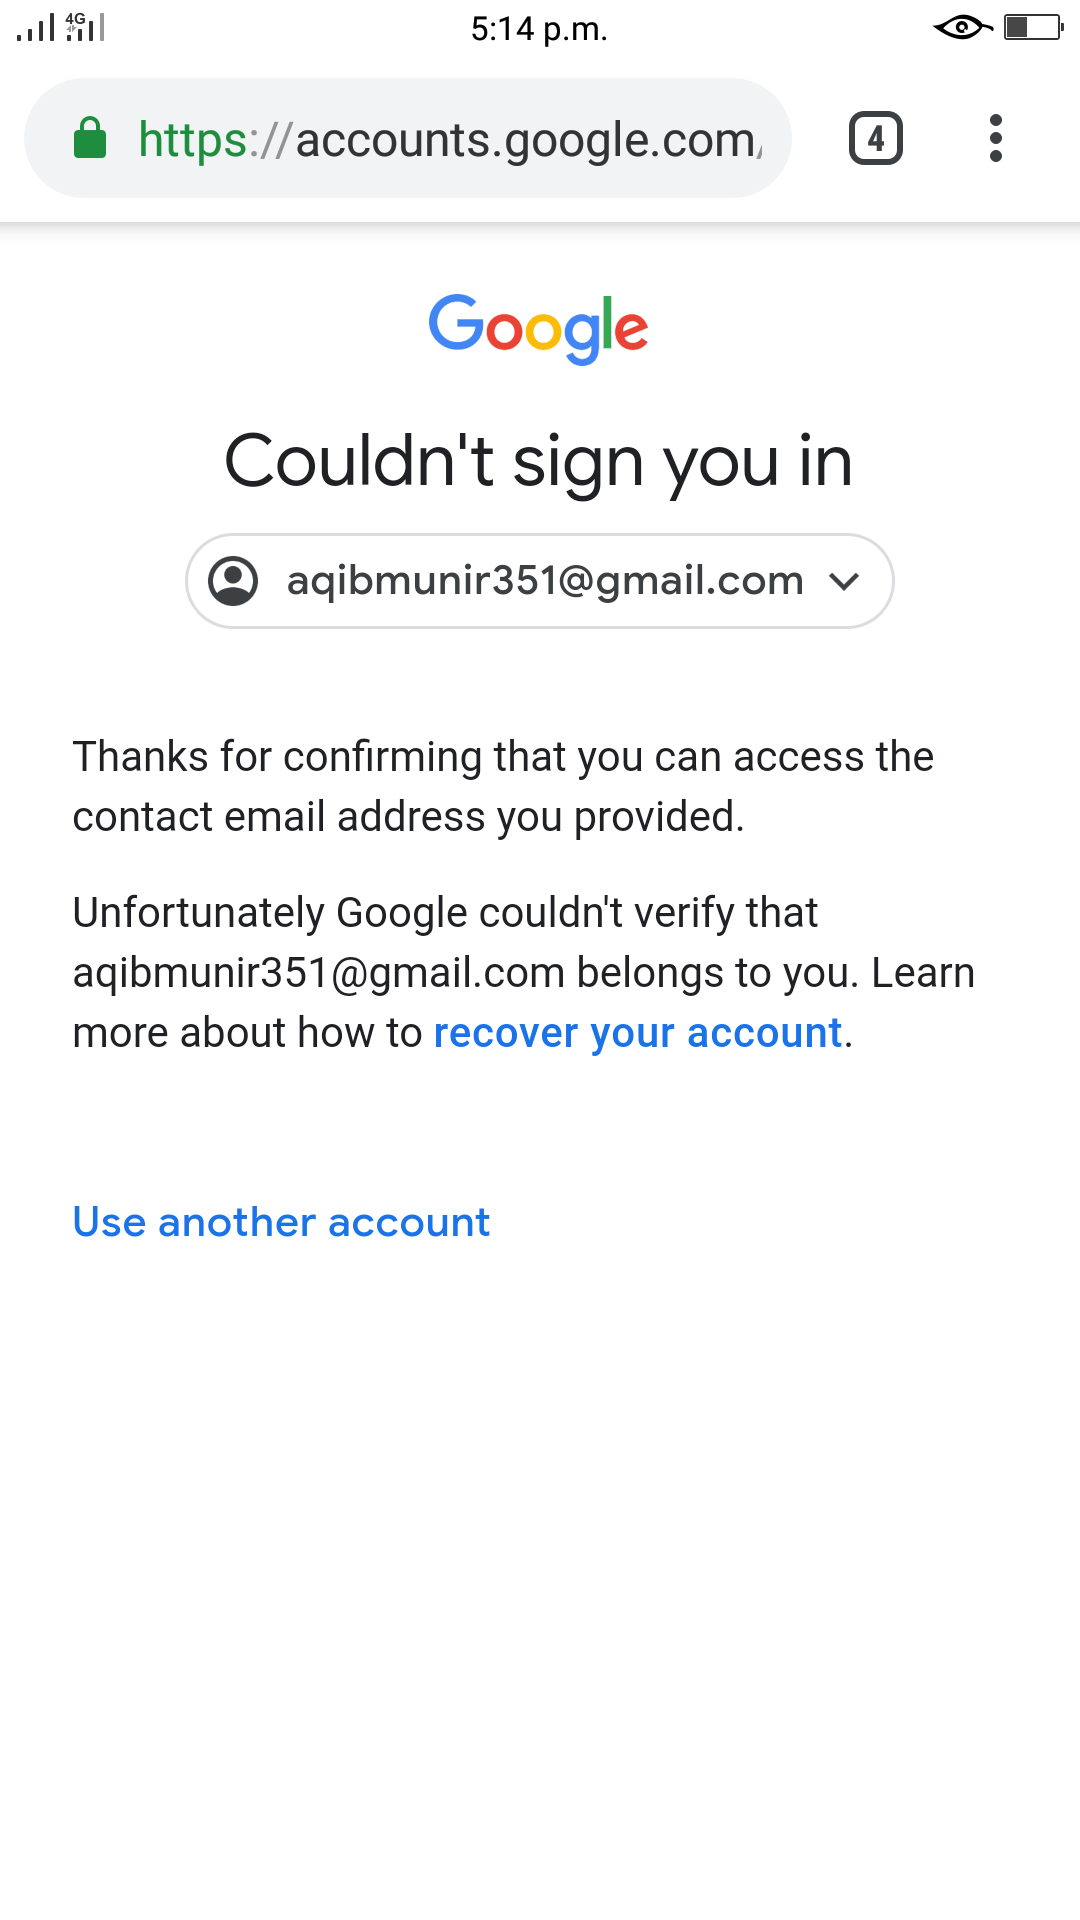 If none of the above steps resolve the issue, reach out to Gmail support for further assistance.
Provide them with detailed information about the problem and steps you have already taken.